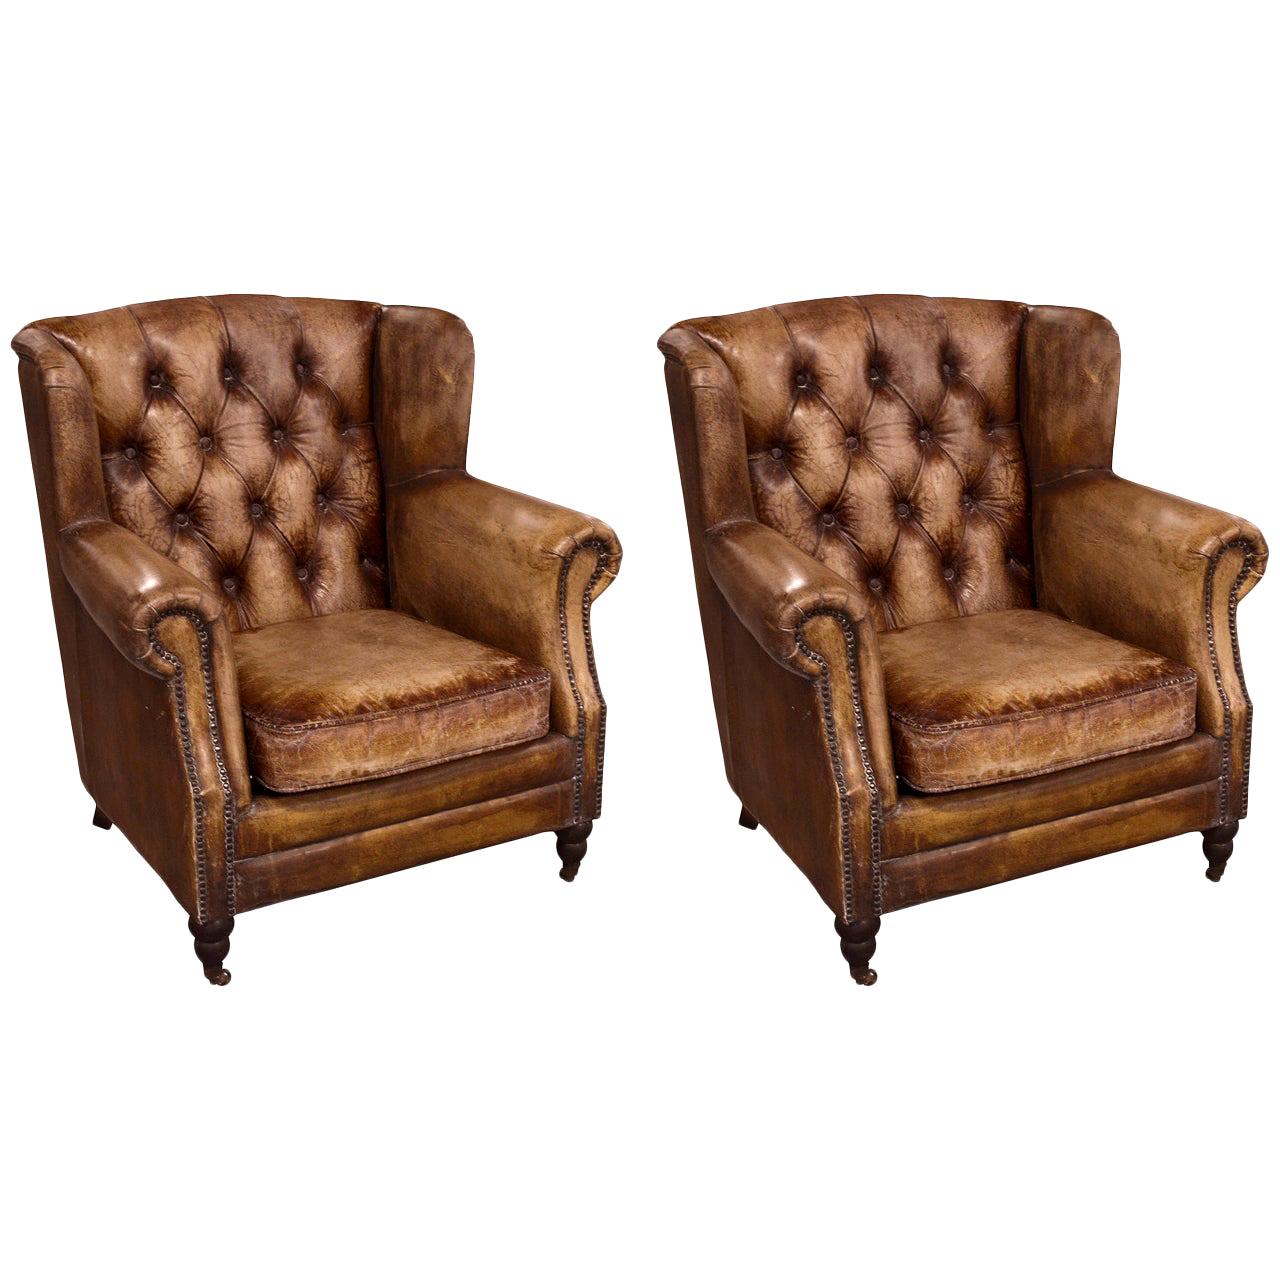 Pair of English Library Chairs with Distressed Leather, Priced Per Chair